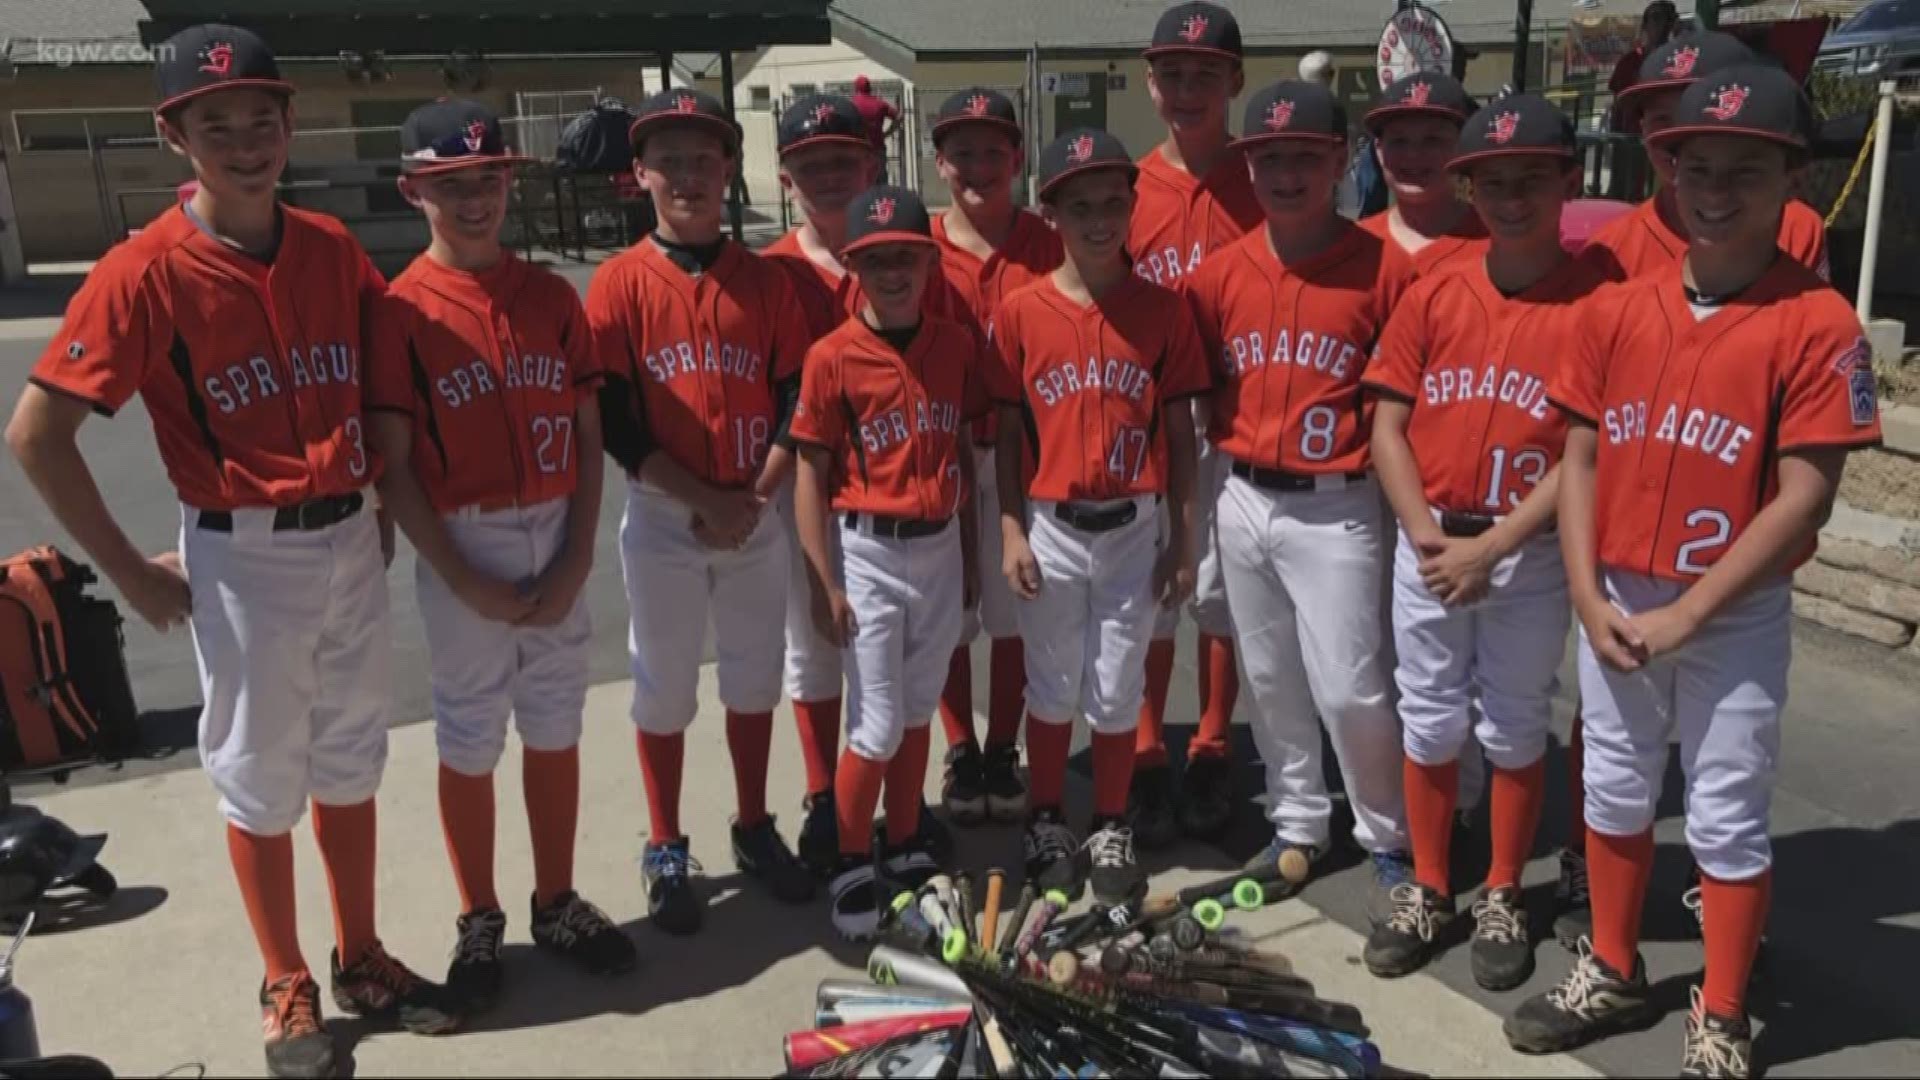 World Series bound. The Sprague Little League team is heading to the World Series.